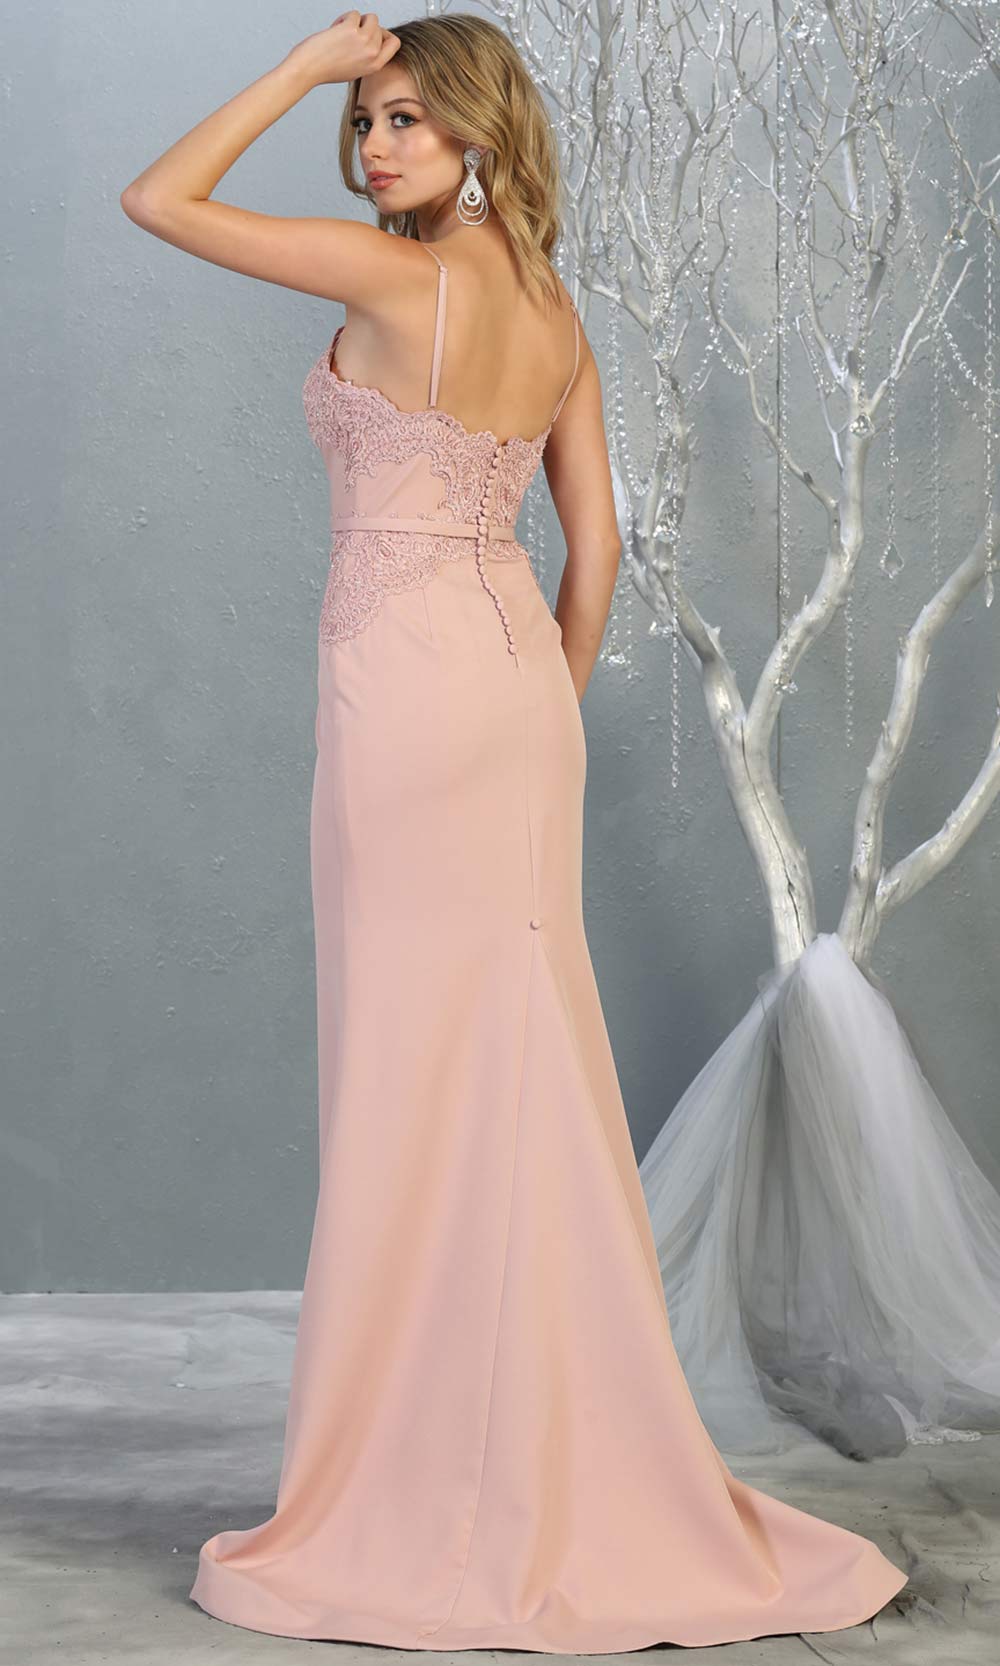 Mayqueen MQ1759 long dusty rose lace top evening fitted dress w/straps. Full length light pink gown is perfect for bridesmaids, enagagement/e-shoot dress, wedding guest dress, indowestern gown, formal evening party dress, prom. Plus sizes avail-b.jpg